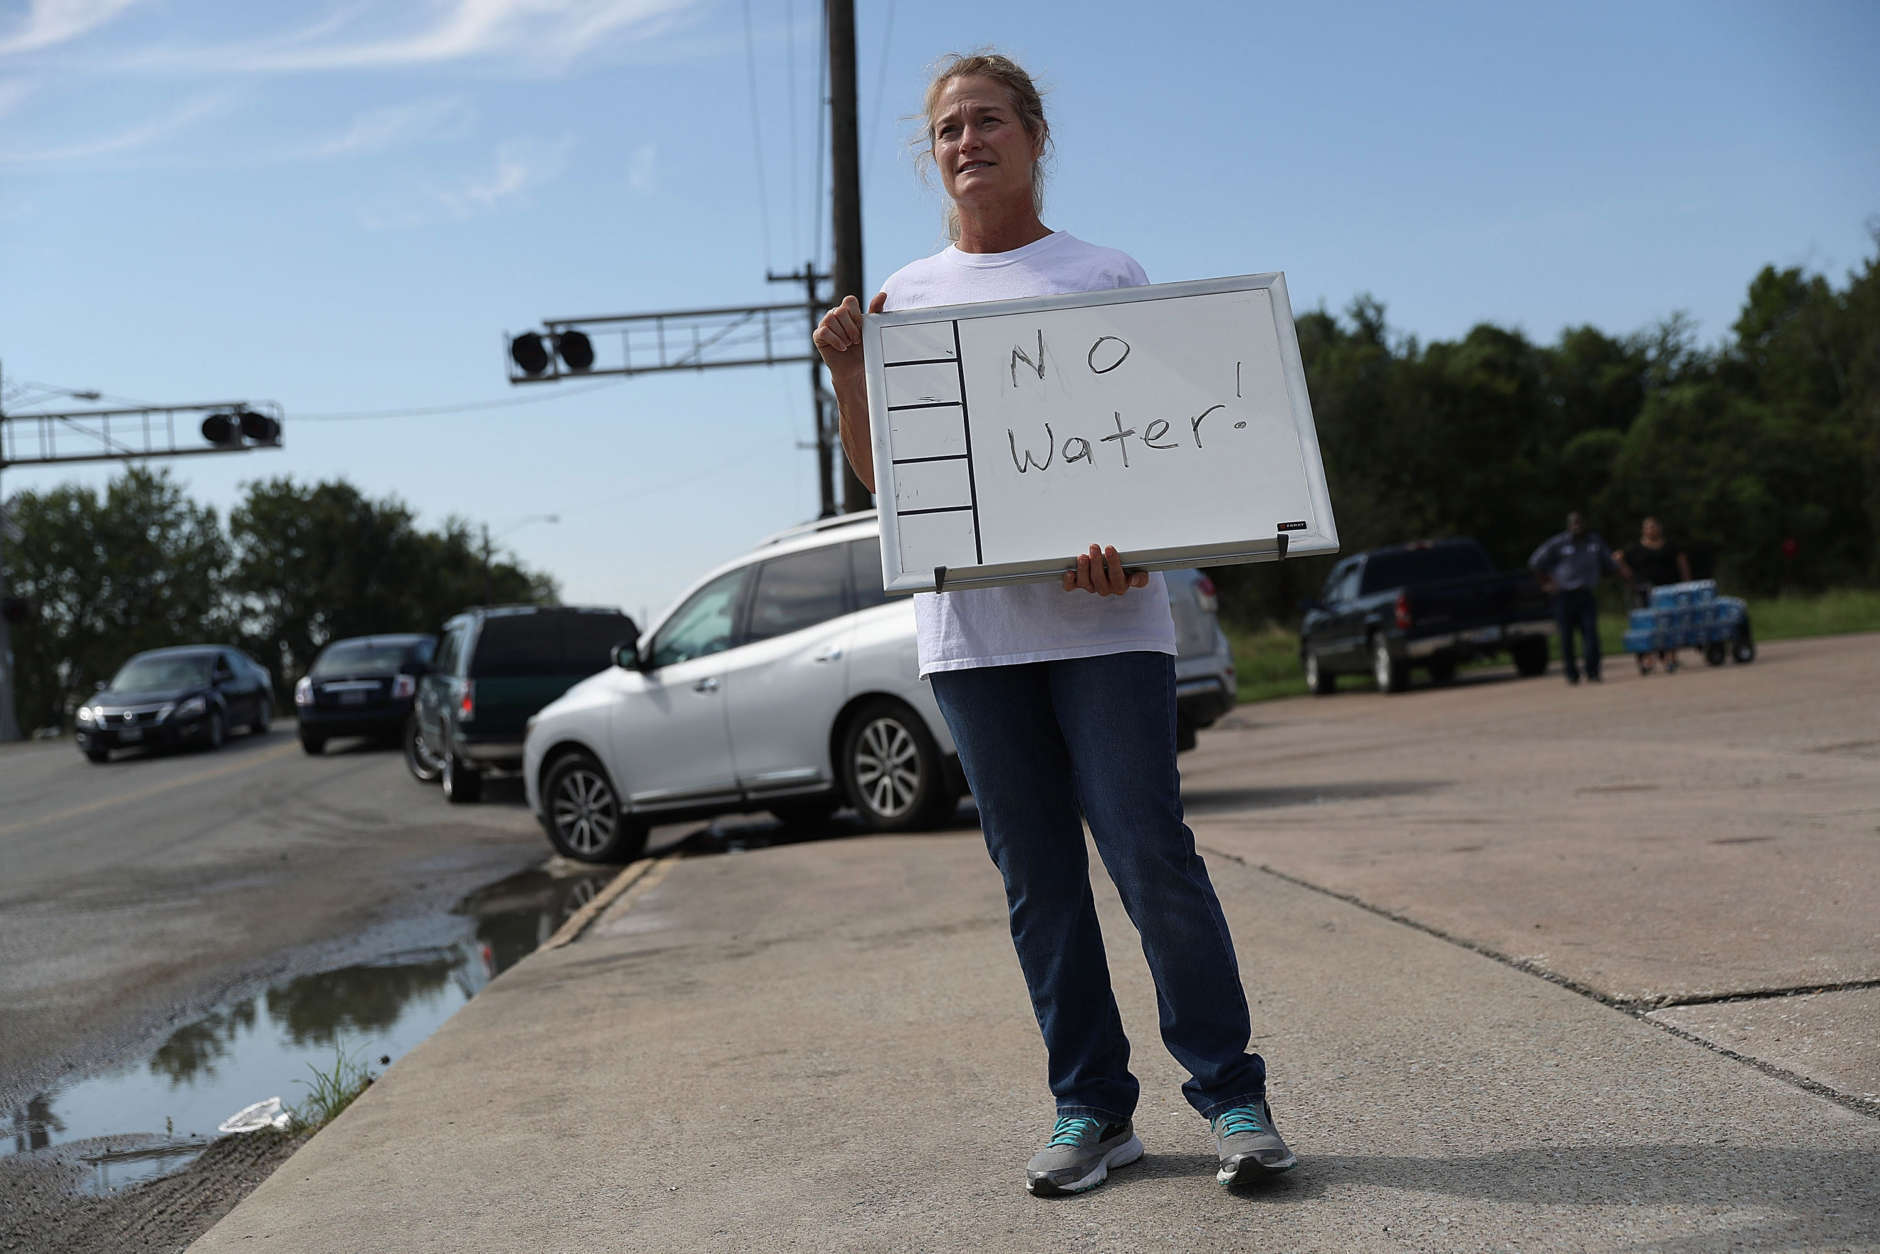 BEAUMONT, TX - AUGUST 31: Barbara Nelson from Coastal Industrial and Specialty gas welding supplies store holds a sign that reads, 'no water', after they ran out of bottled water for people that are in need after the water supply to the city of Beaumont was shut down after Hurricane Harvey passed through on August 31, 2017 in Beaumont, Texas. Harvey, which made landfall north of Corpus Christi August 25, has dumped more than 50 inches of rain in some areas in and around Houston. (Photo by Joe Raedle/Getty Images)